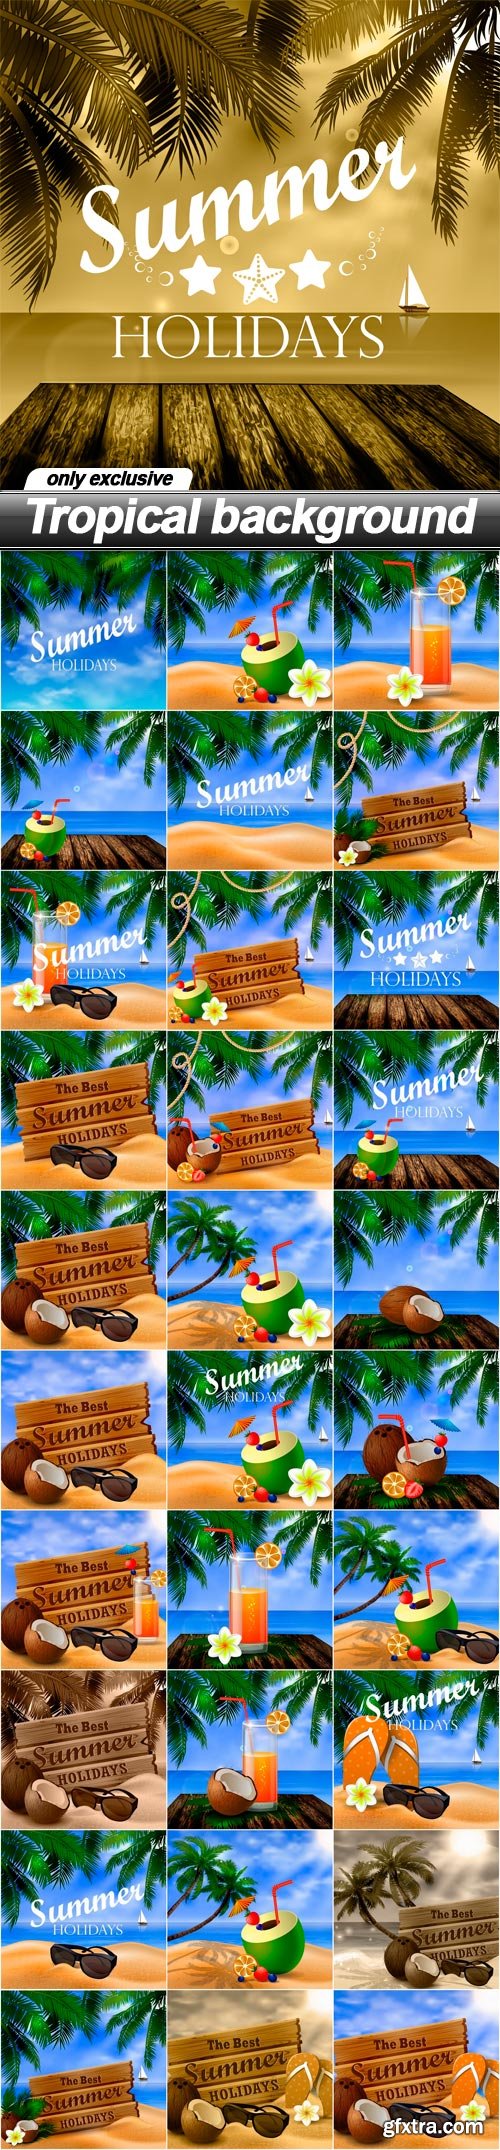 Tropical background - 31 EPS